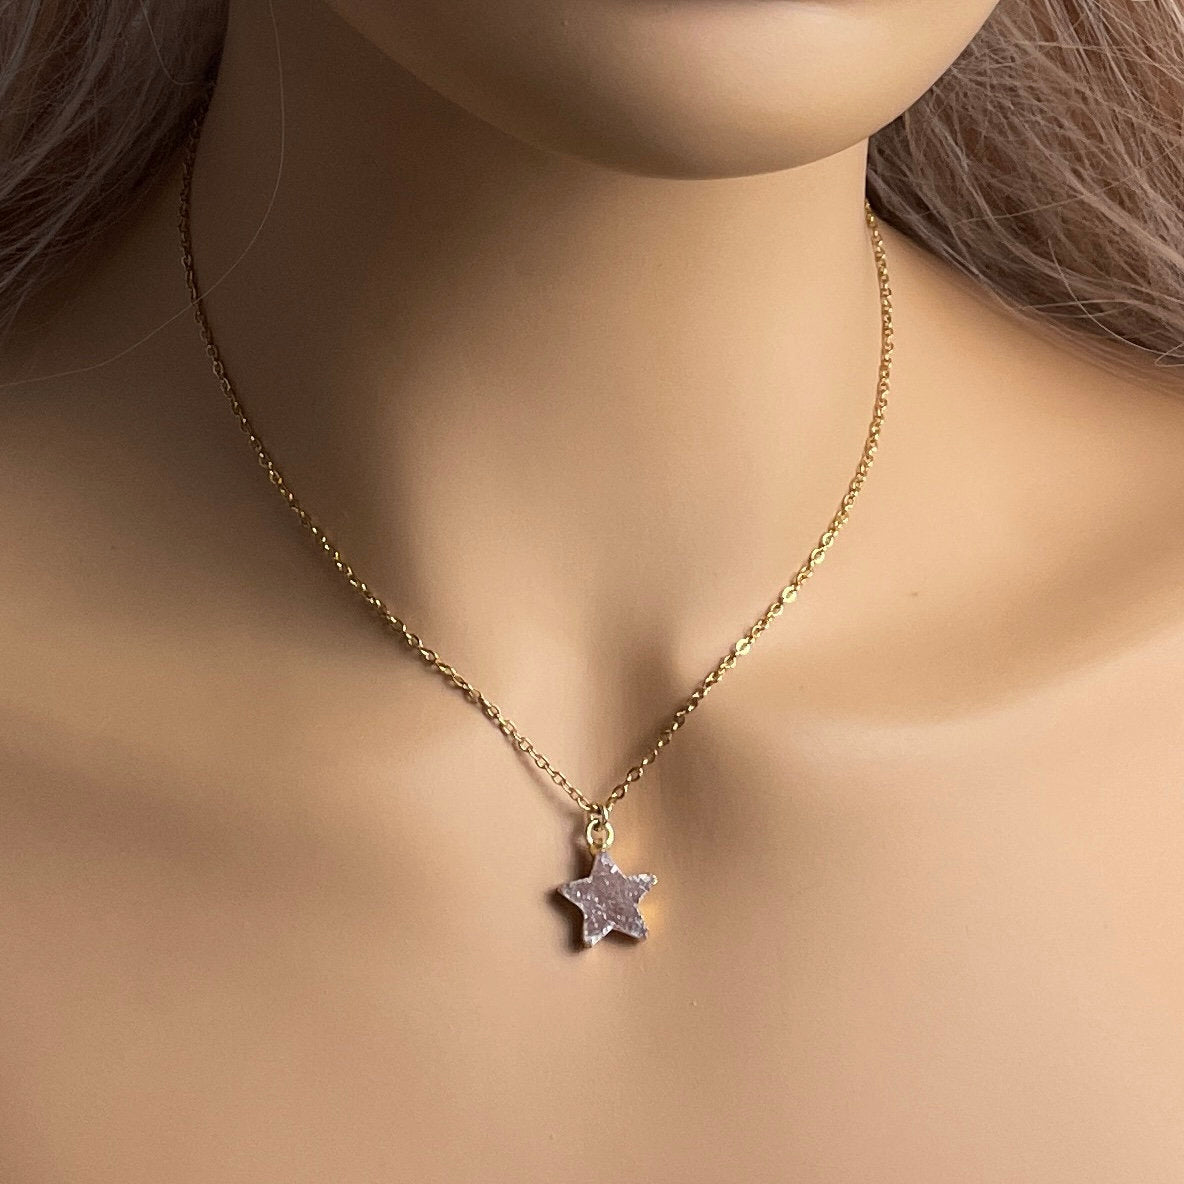 Tiny Star Natural Druzy Crystal Necklace on 18K Gold Stainless Steel Chain, G15-25